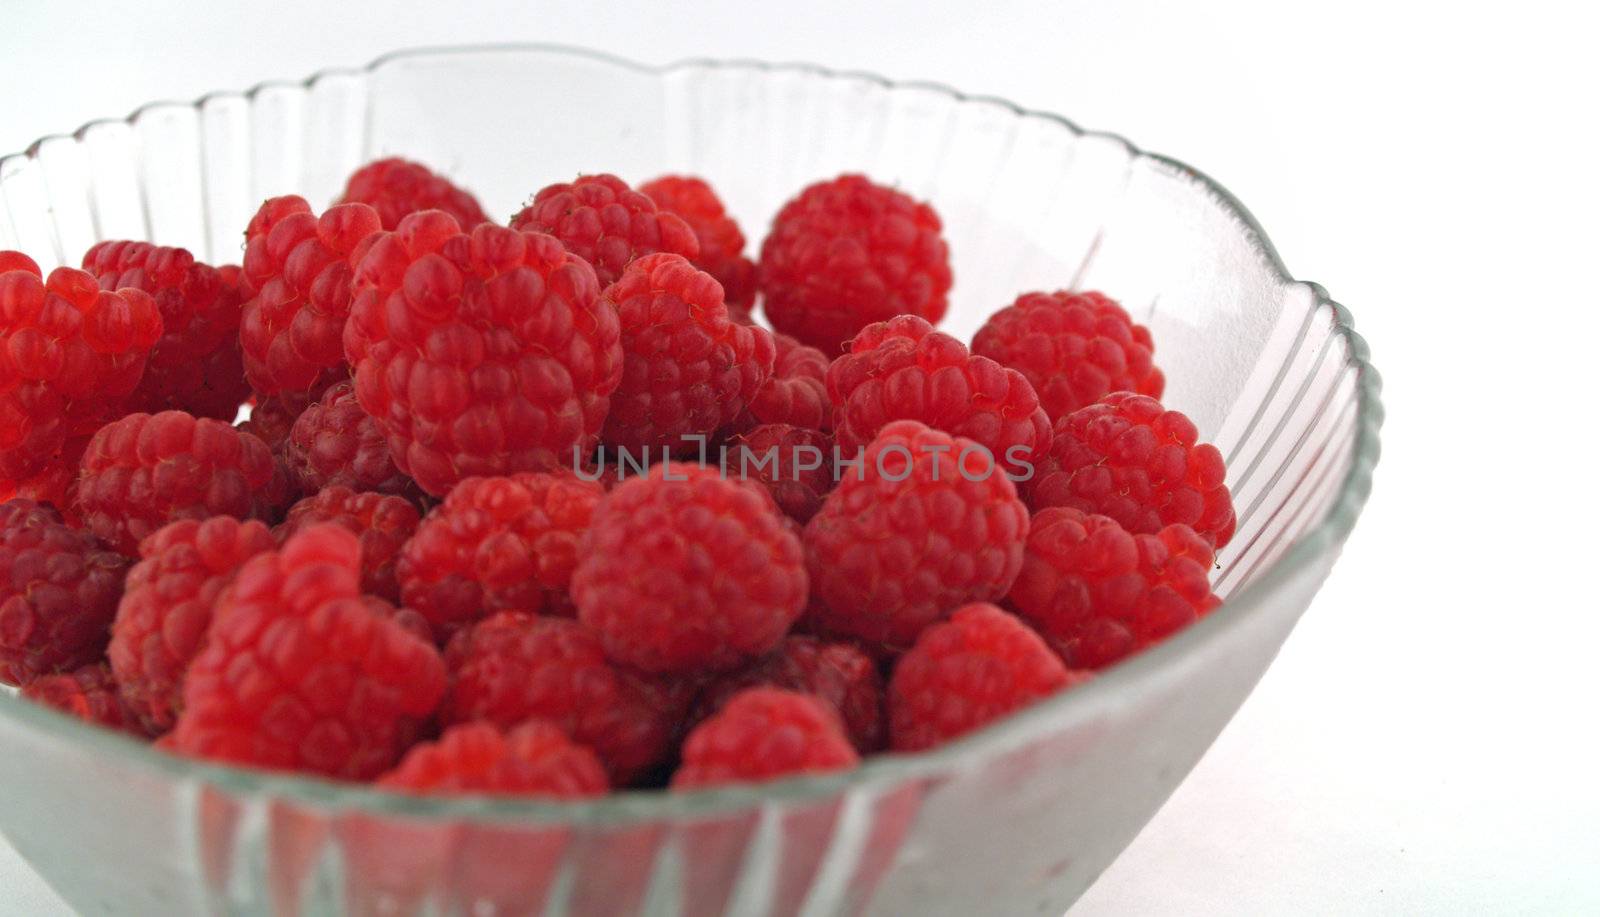 Raspberries Close Up in a Bowl on White